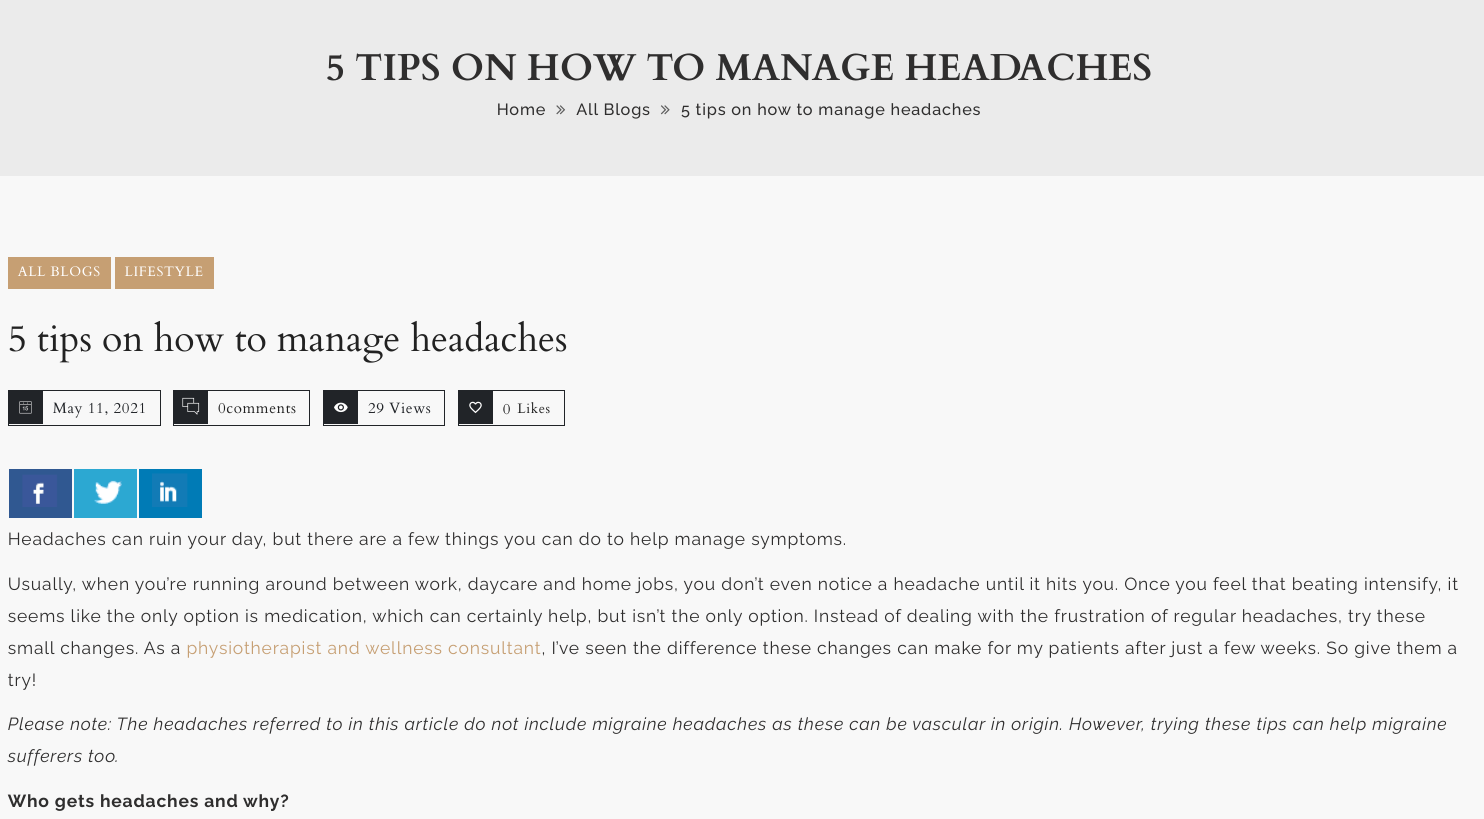 5 Tips on Managing Headaches